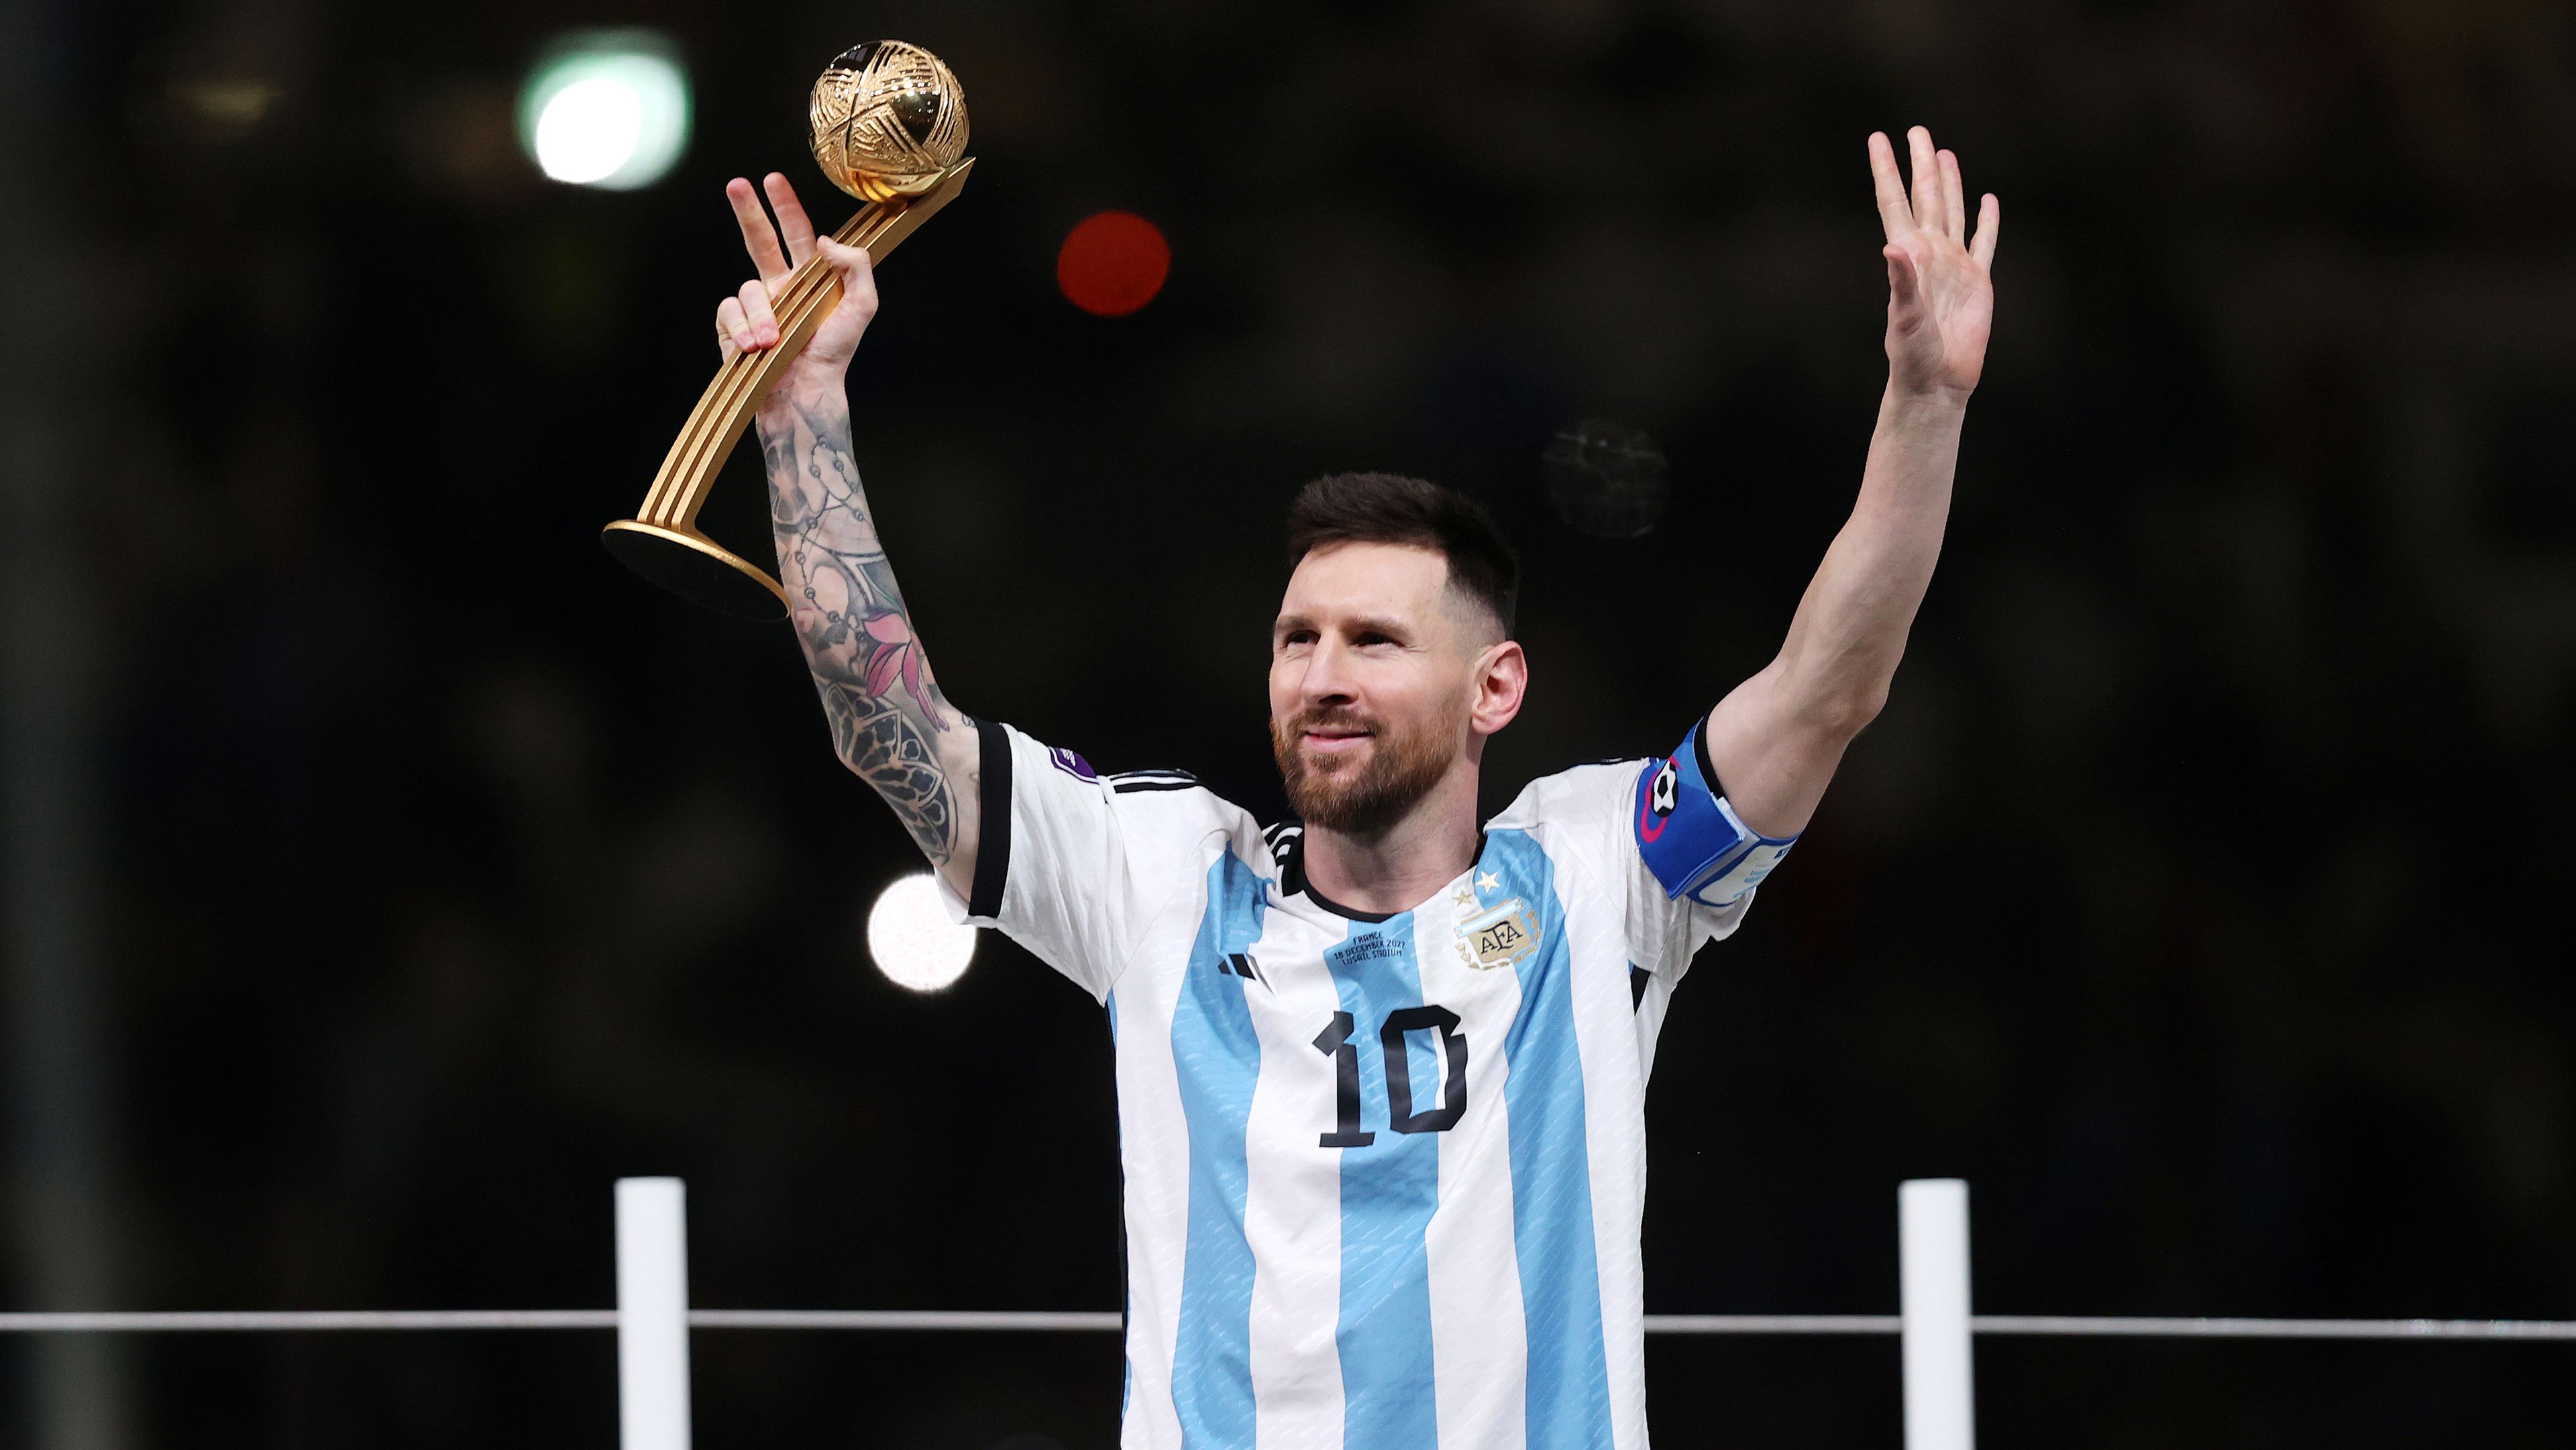 Lionel Messi of Argentina poses for a photo with the adidas Golden Ball after the team&#x27;s victory during the FIFA World Cup Qatar 2022 Final match between Argentina and France at Lusail Stadium on December 18, 2022 in Lusail City, Qatar. (Photo by Julian Finney/Getty Images)